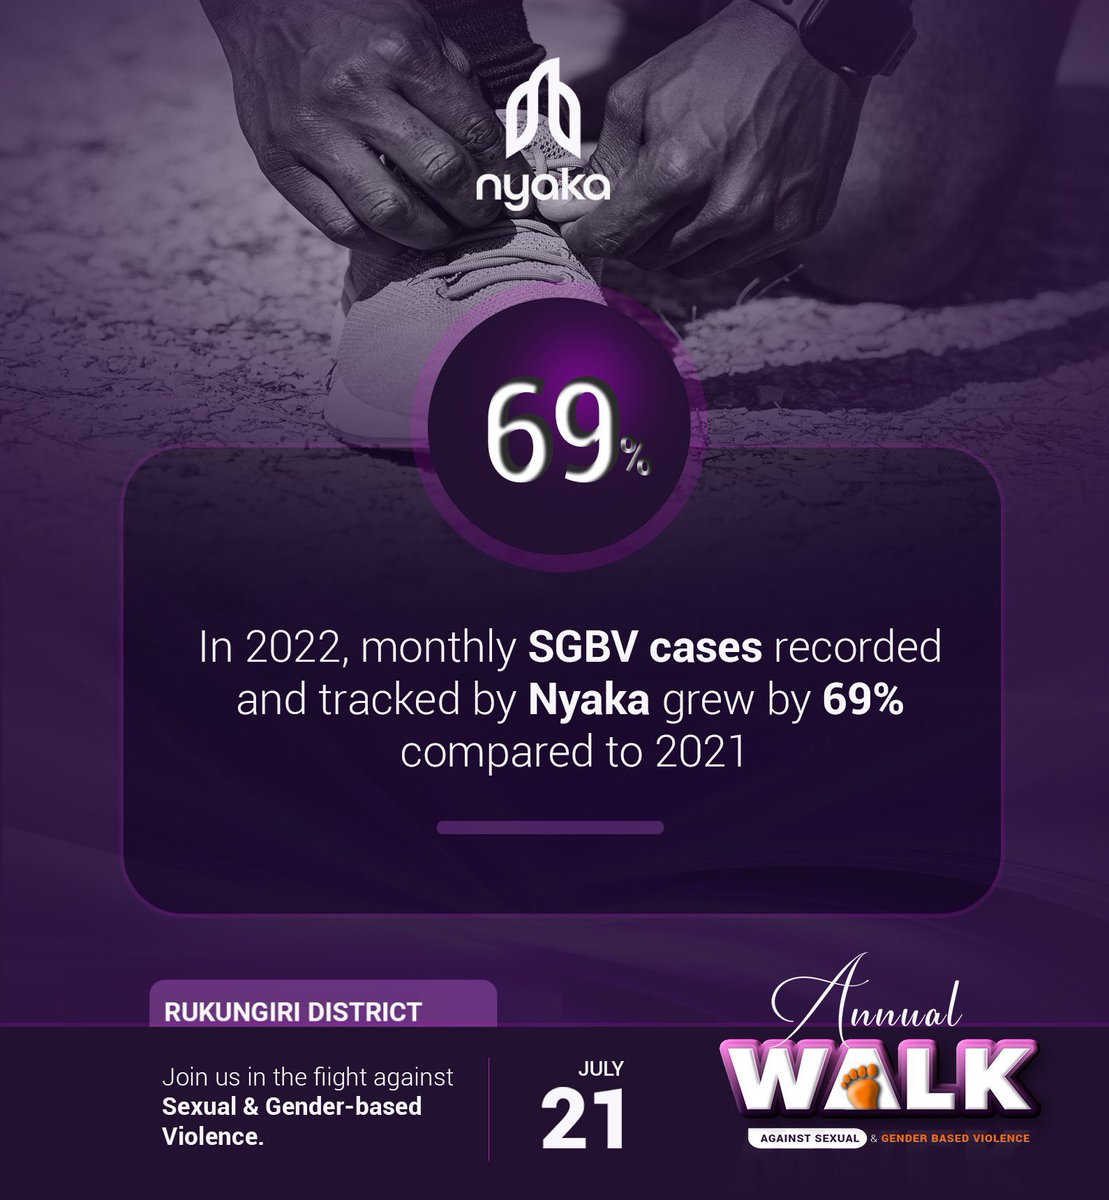 Silence is not an option when it comes to Sexual and Gender Based Violence in our communities,it only perpetuates the cycle.Let's break the cycle of fear and take a stand

Join #NyakaWalk23 as we walk together, showing victims they are not alone and violence is not the norm